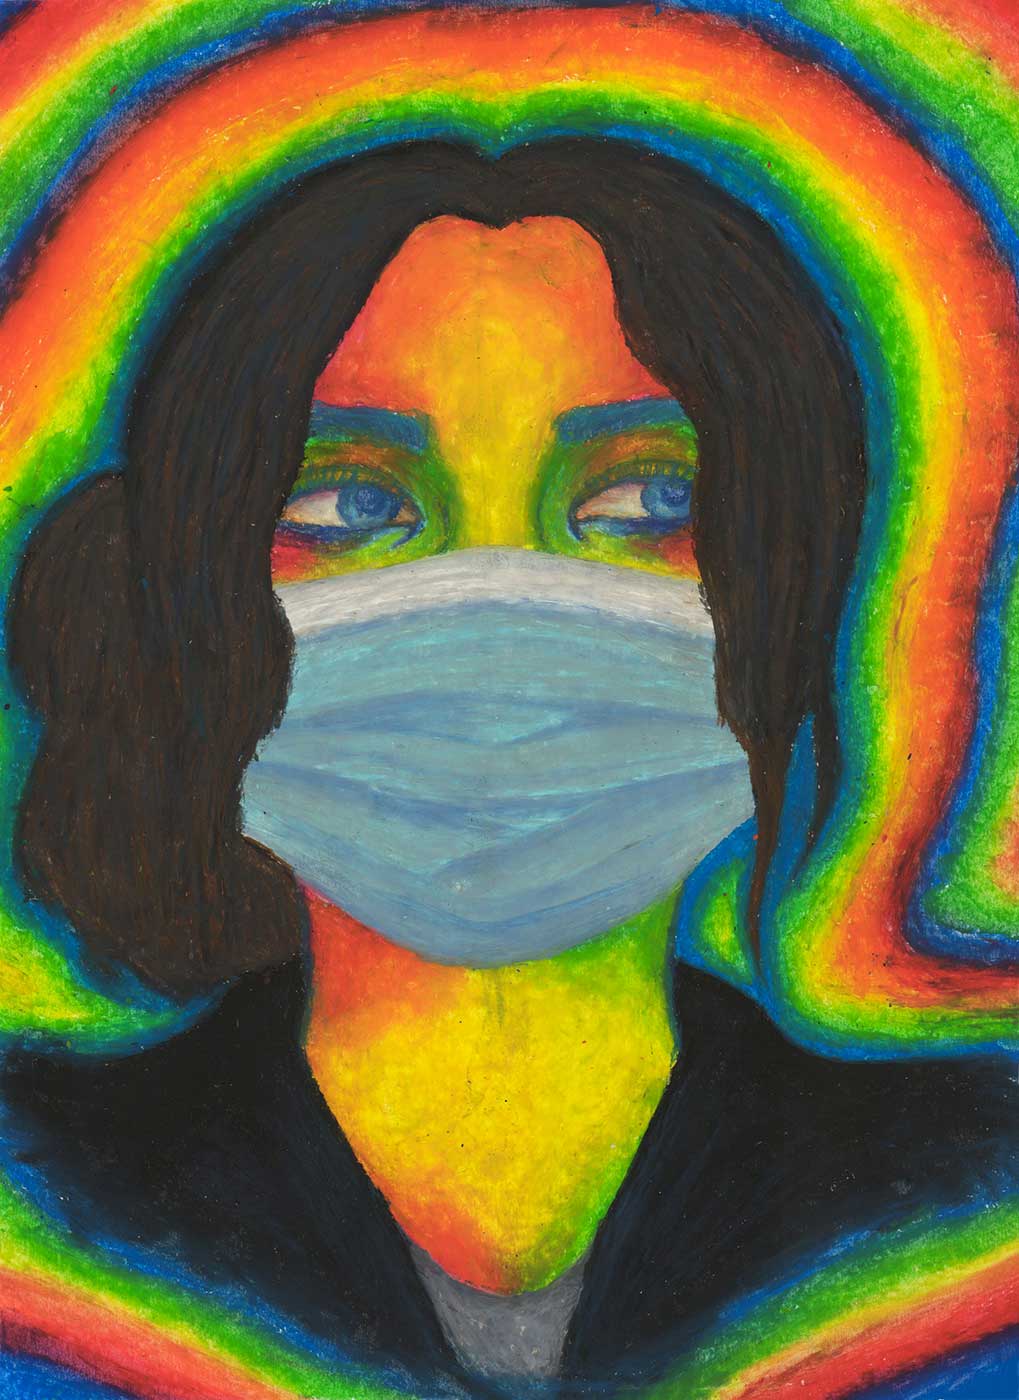 colorful drawing of a person wearing a mask looking towards their side.